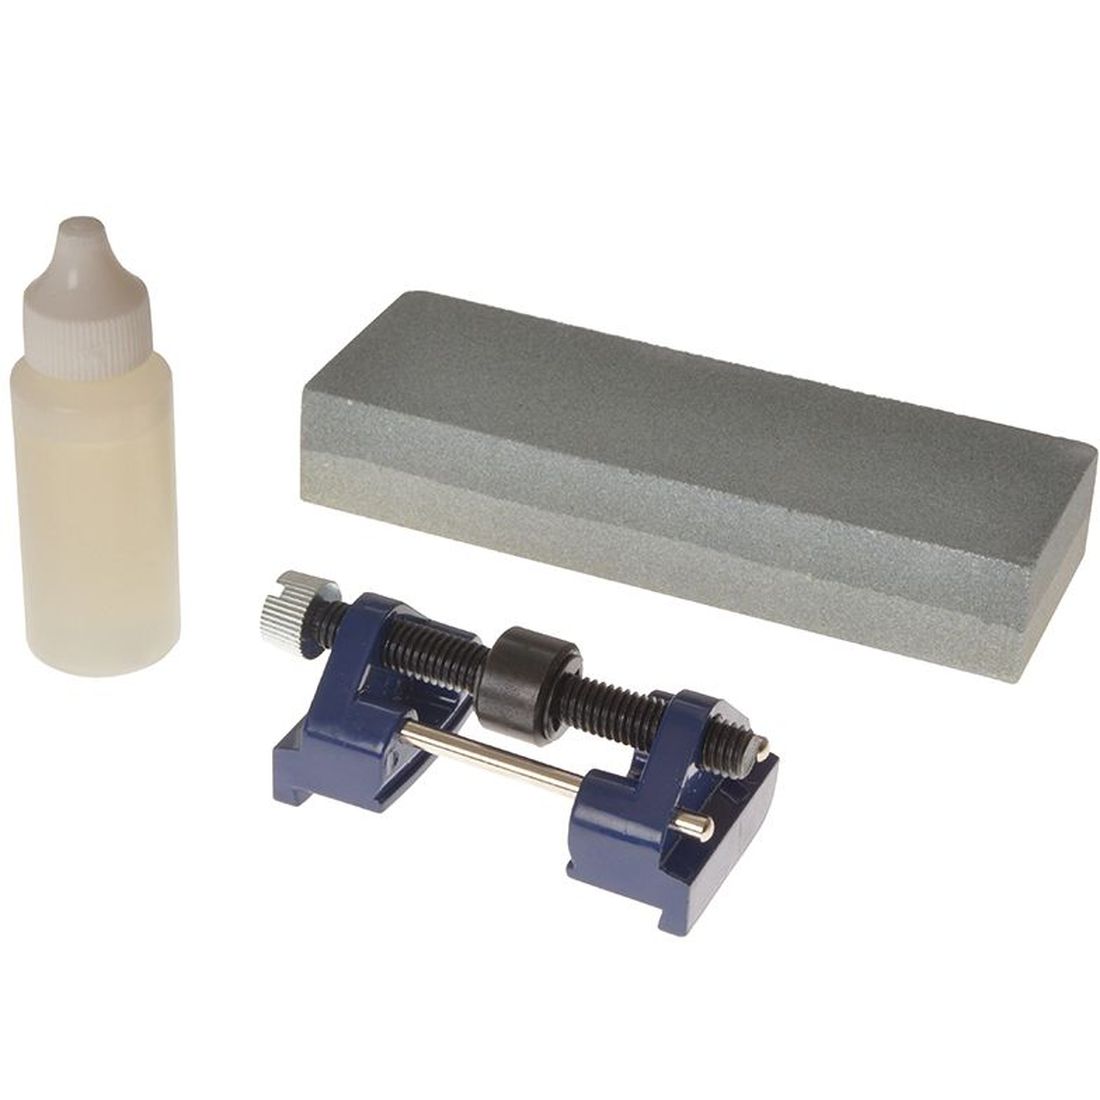 IRWIN Honing Guide  Stone & Oil Set of 3